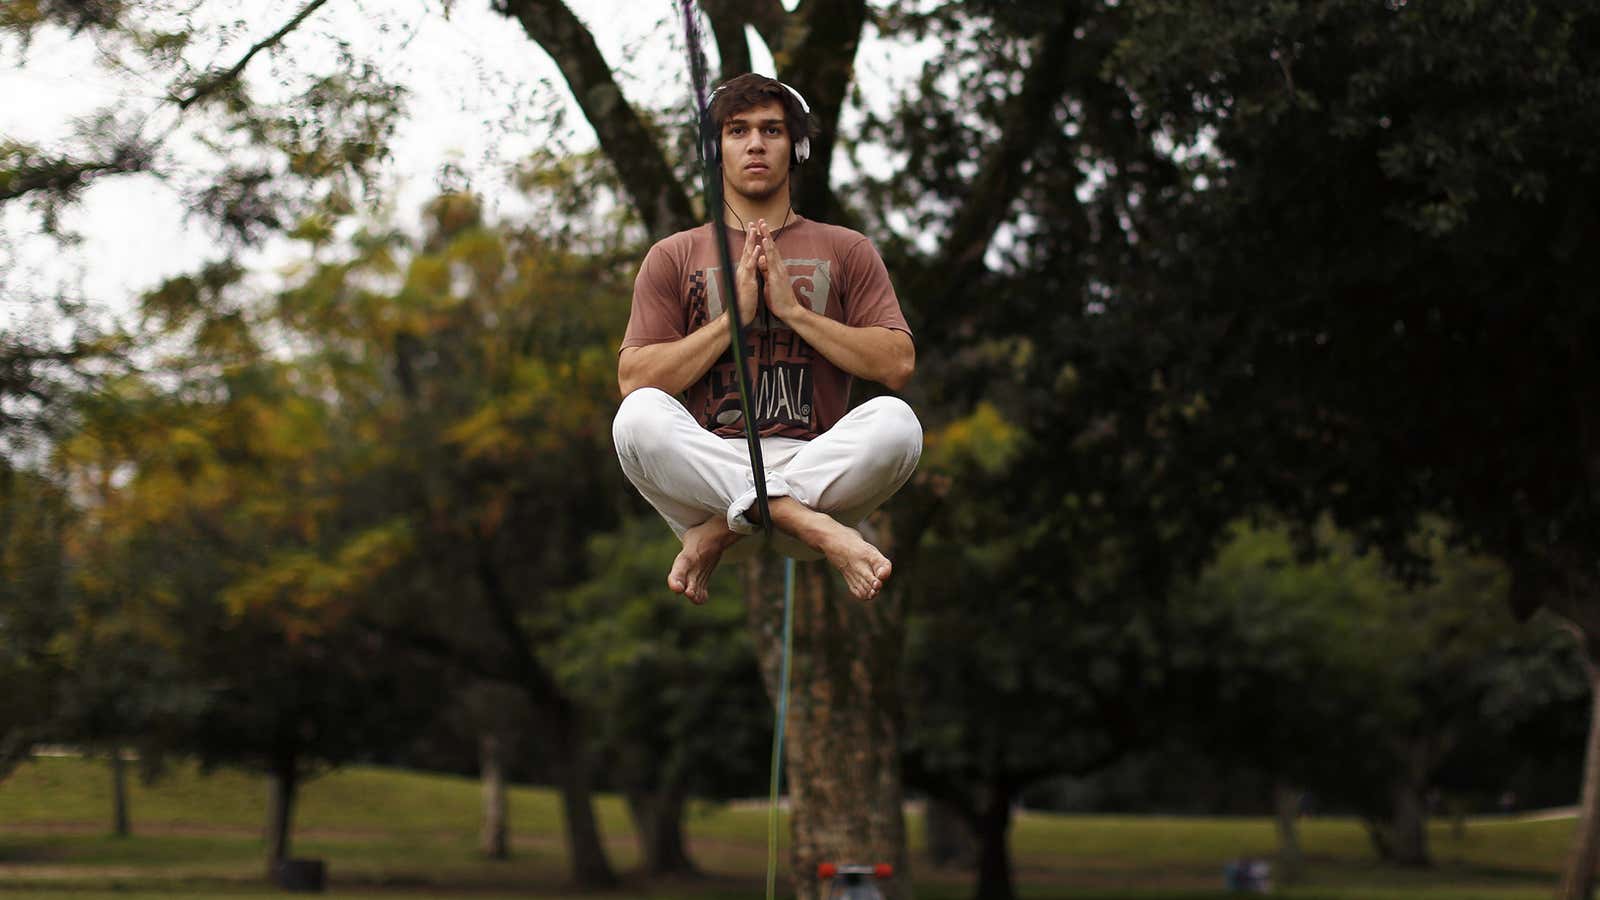 Vitor Haas concentrates as he sits on a rope before tightrope walking near the Beira-Rio stadium in Porto Alegre June 16, 2014. In a project…